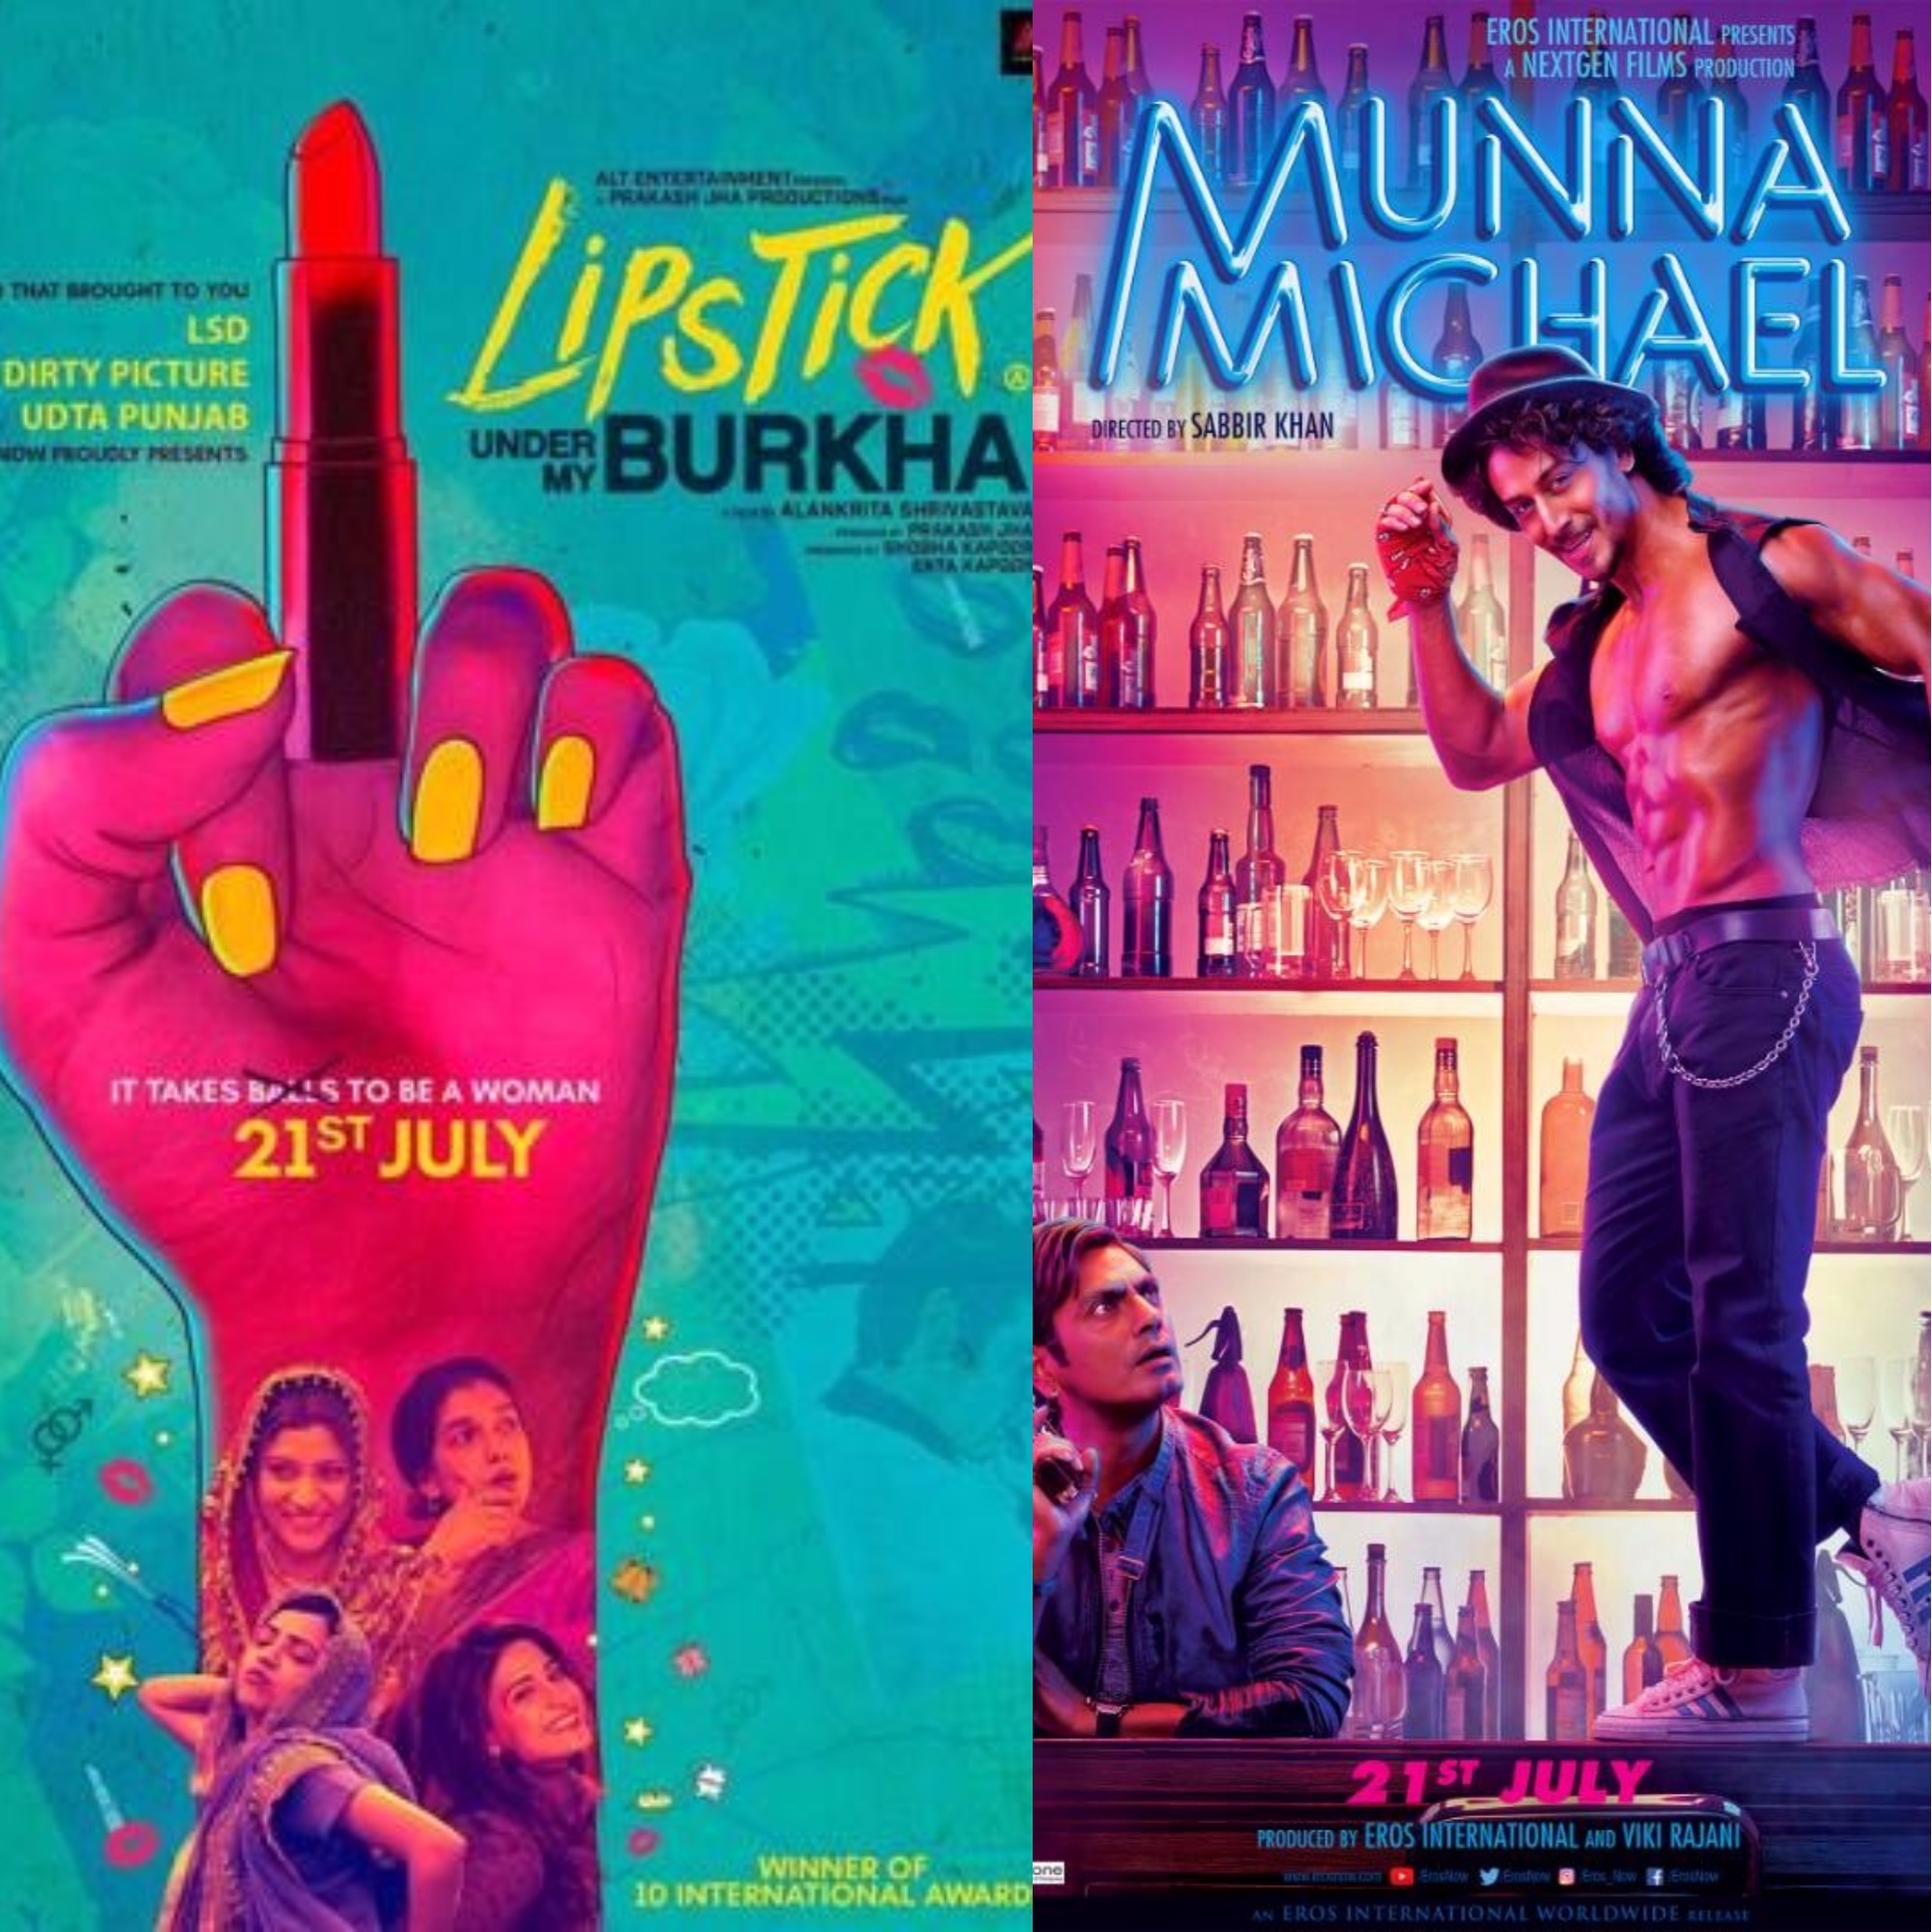 Box Office Report: Lipstick Under My Burkha scores well; Munna Michael does poor business on day 1